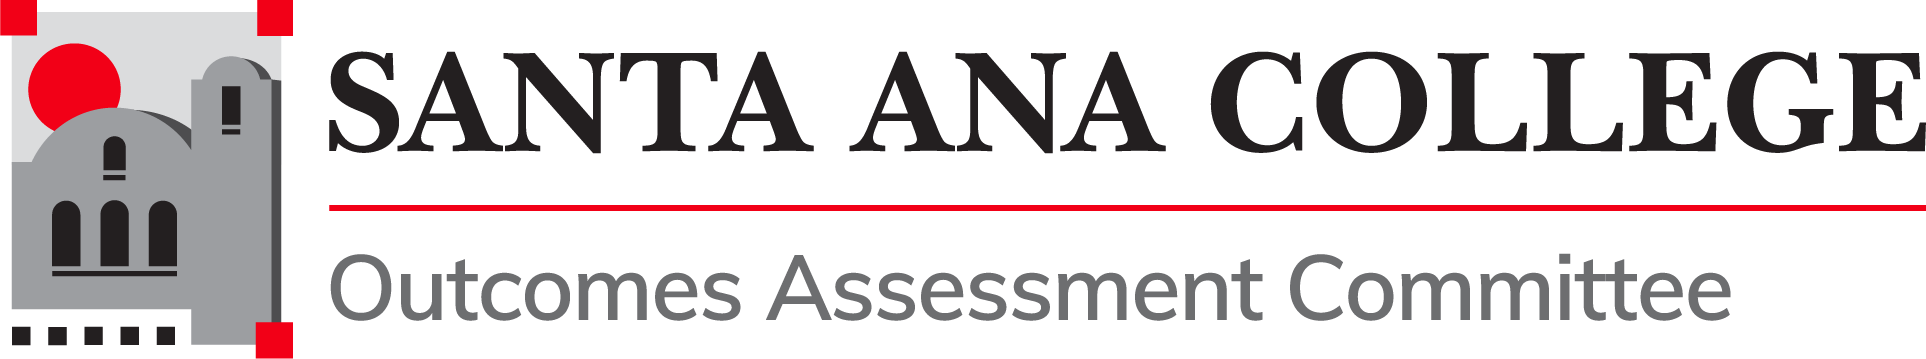 Outcomes Assessment Committee logo